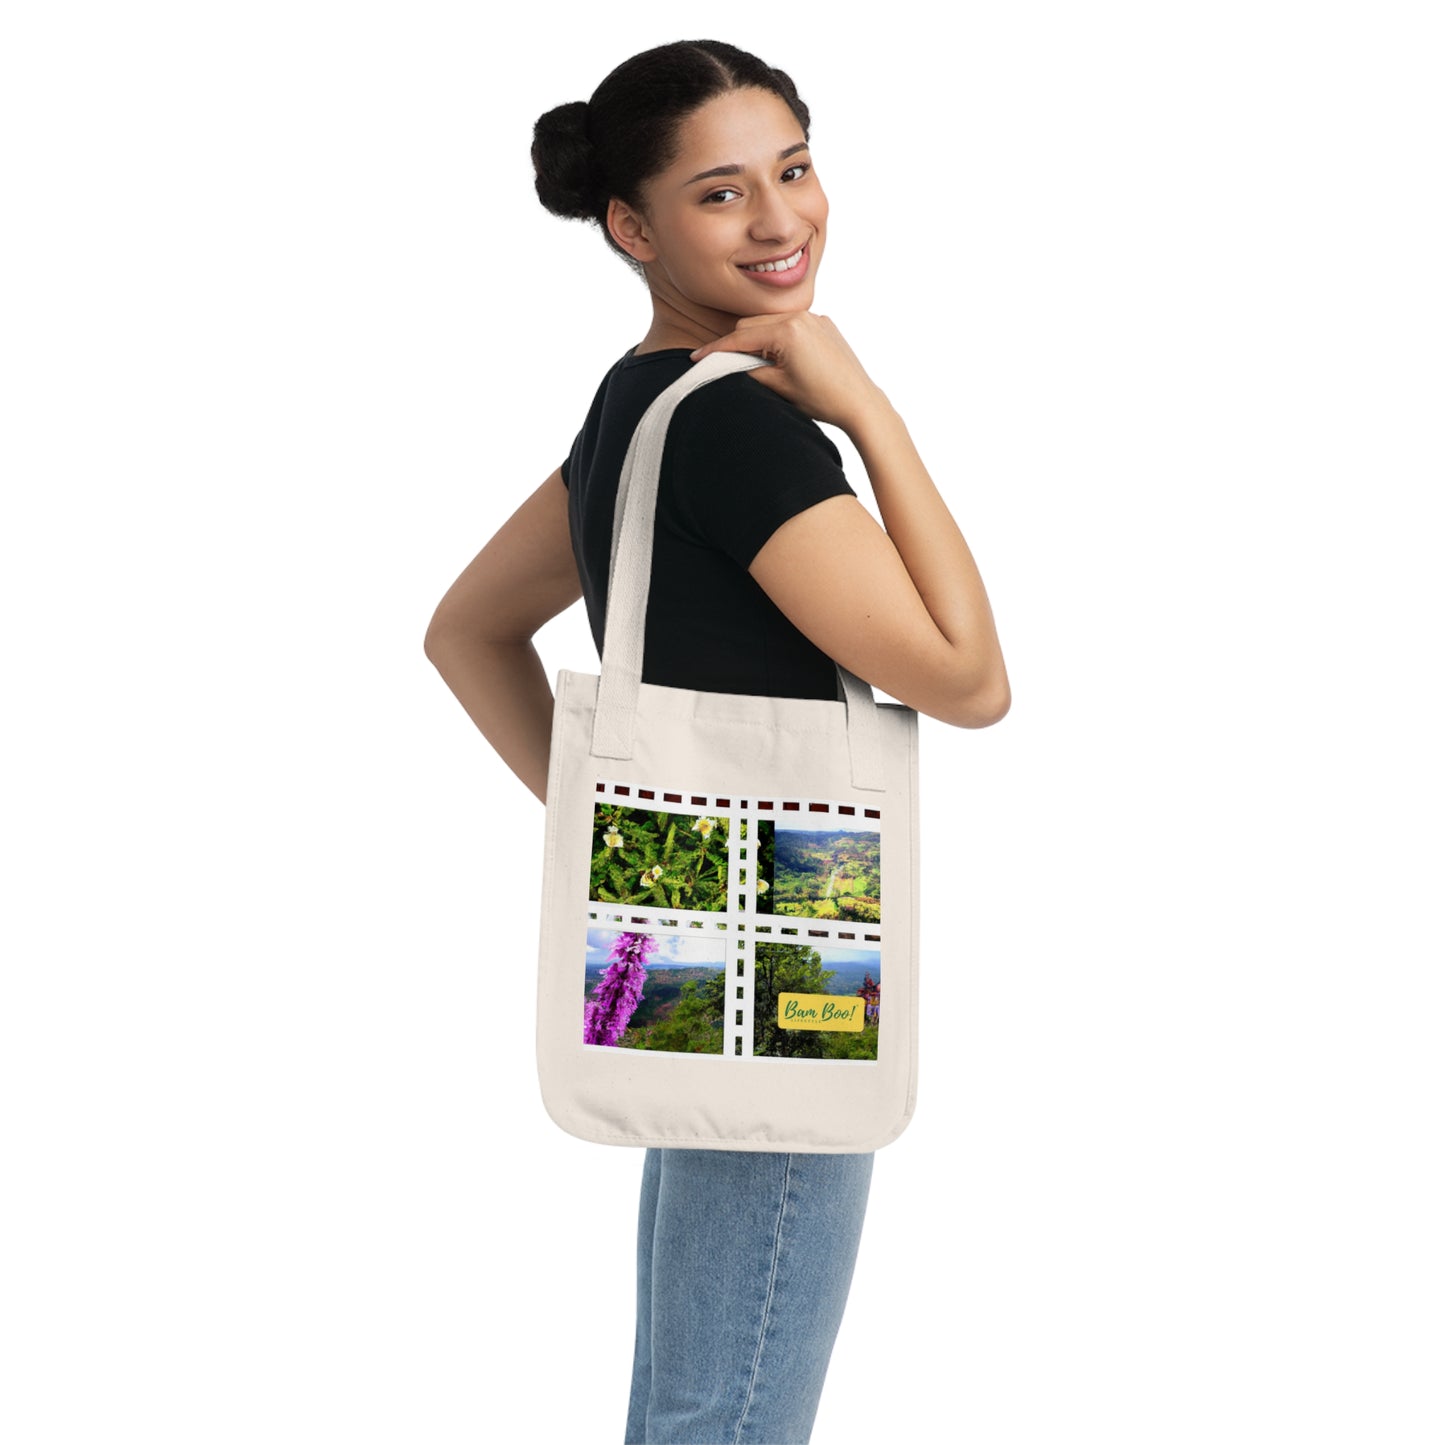 "Picture Perfect: Blending Art and Photography Into a Unique Collage" - Bam Boo! Lifestyle Eco-friendly Tote Bag